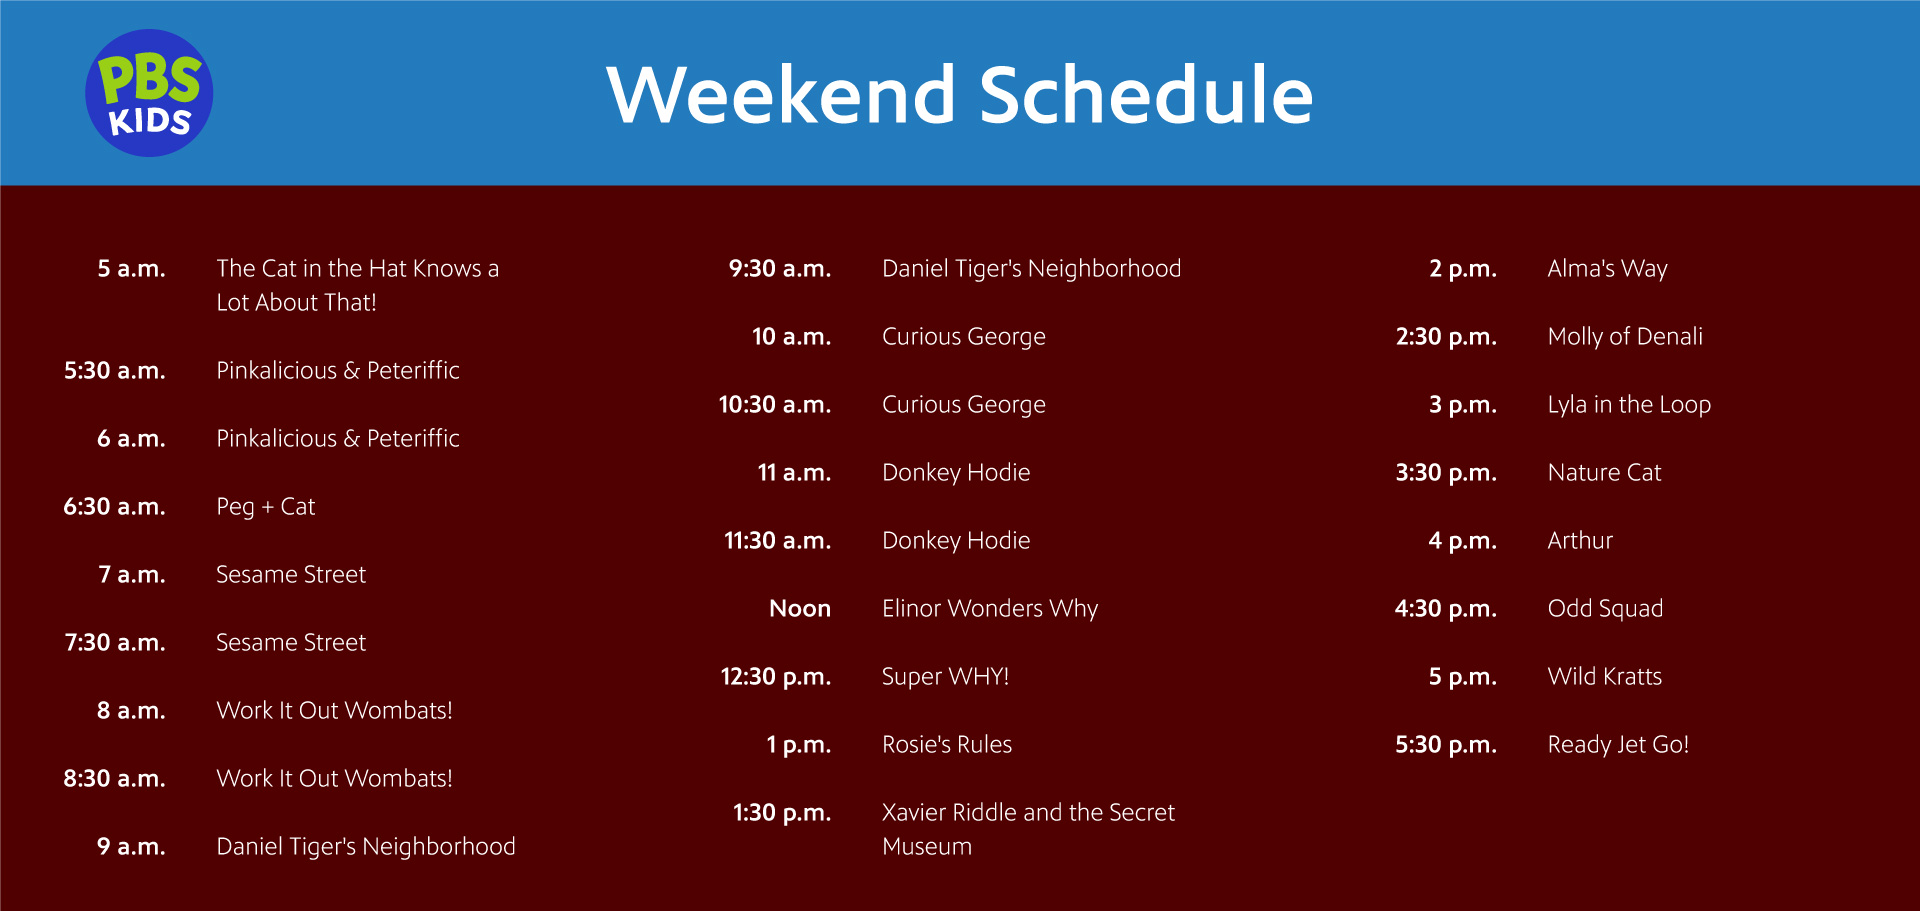 The PBS KIDS weekend schedule with changes as written out below.